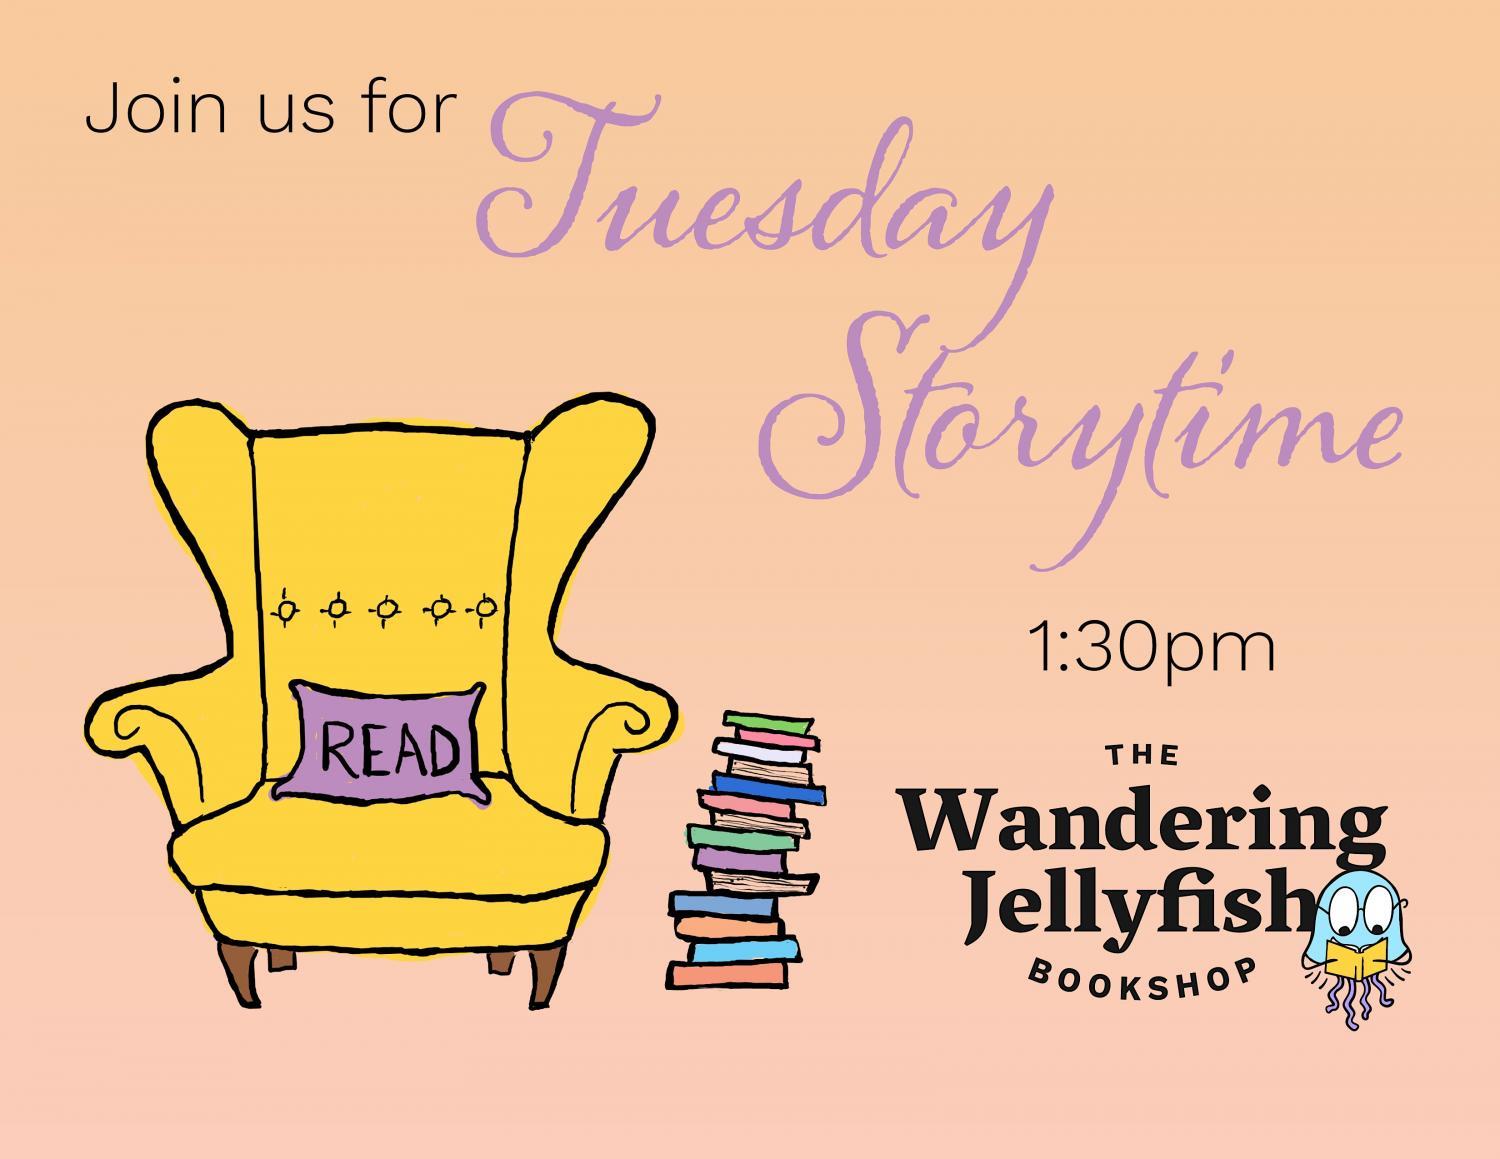 Tuesday Afternoon Storytime at The Wandering Jellyfish Bookshop
Tue Oct 11, 1:30 PM - Tue Oct 11, 2:00 PM